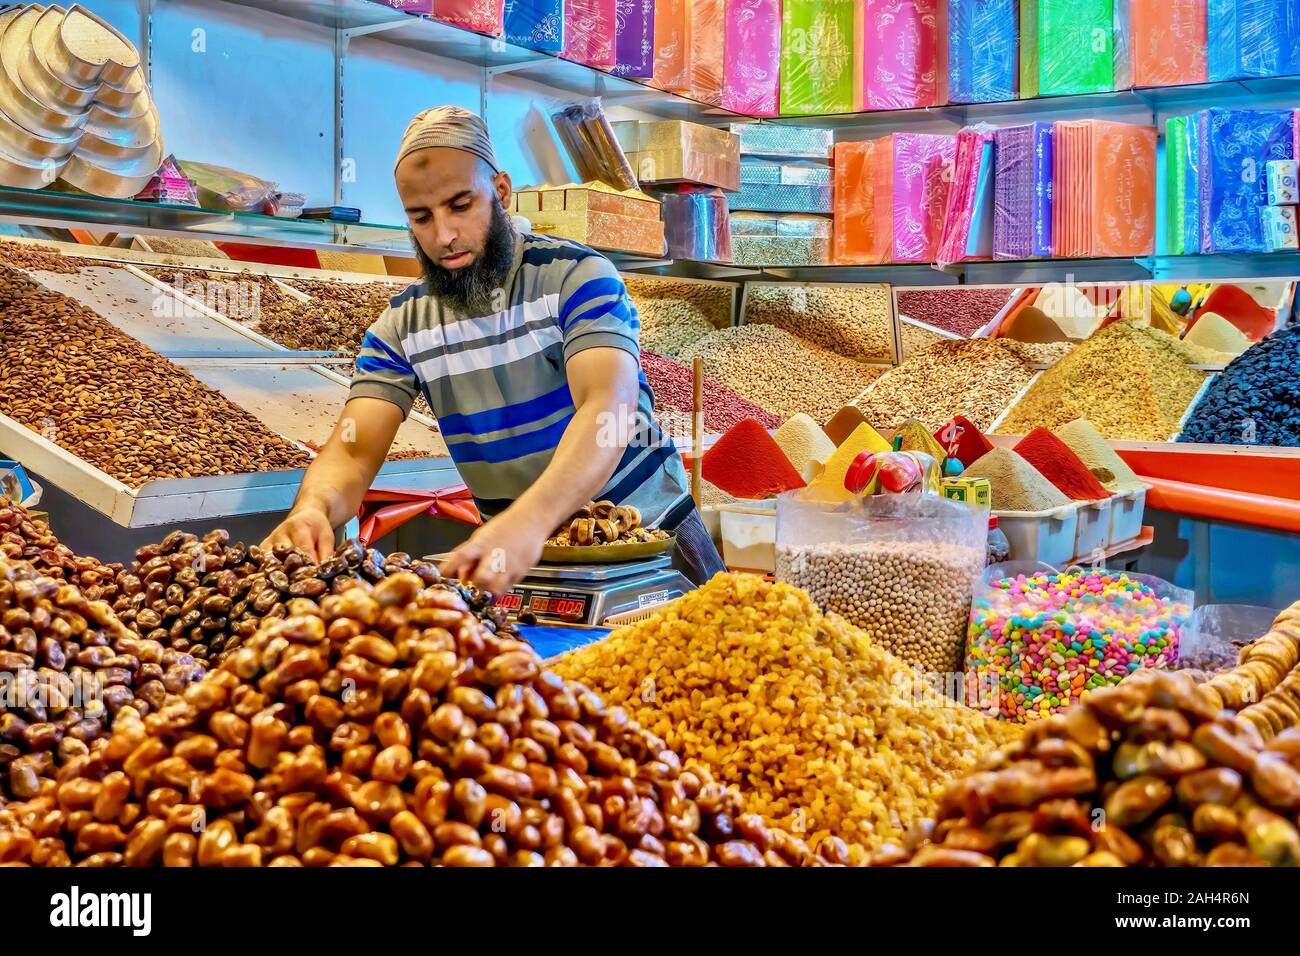 Marrakech, Morocco - October 22, 2015. A Moroccan man at work in a public market stall which sells dates, nuts, spices, candy, and gift boxes. Stock Photo